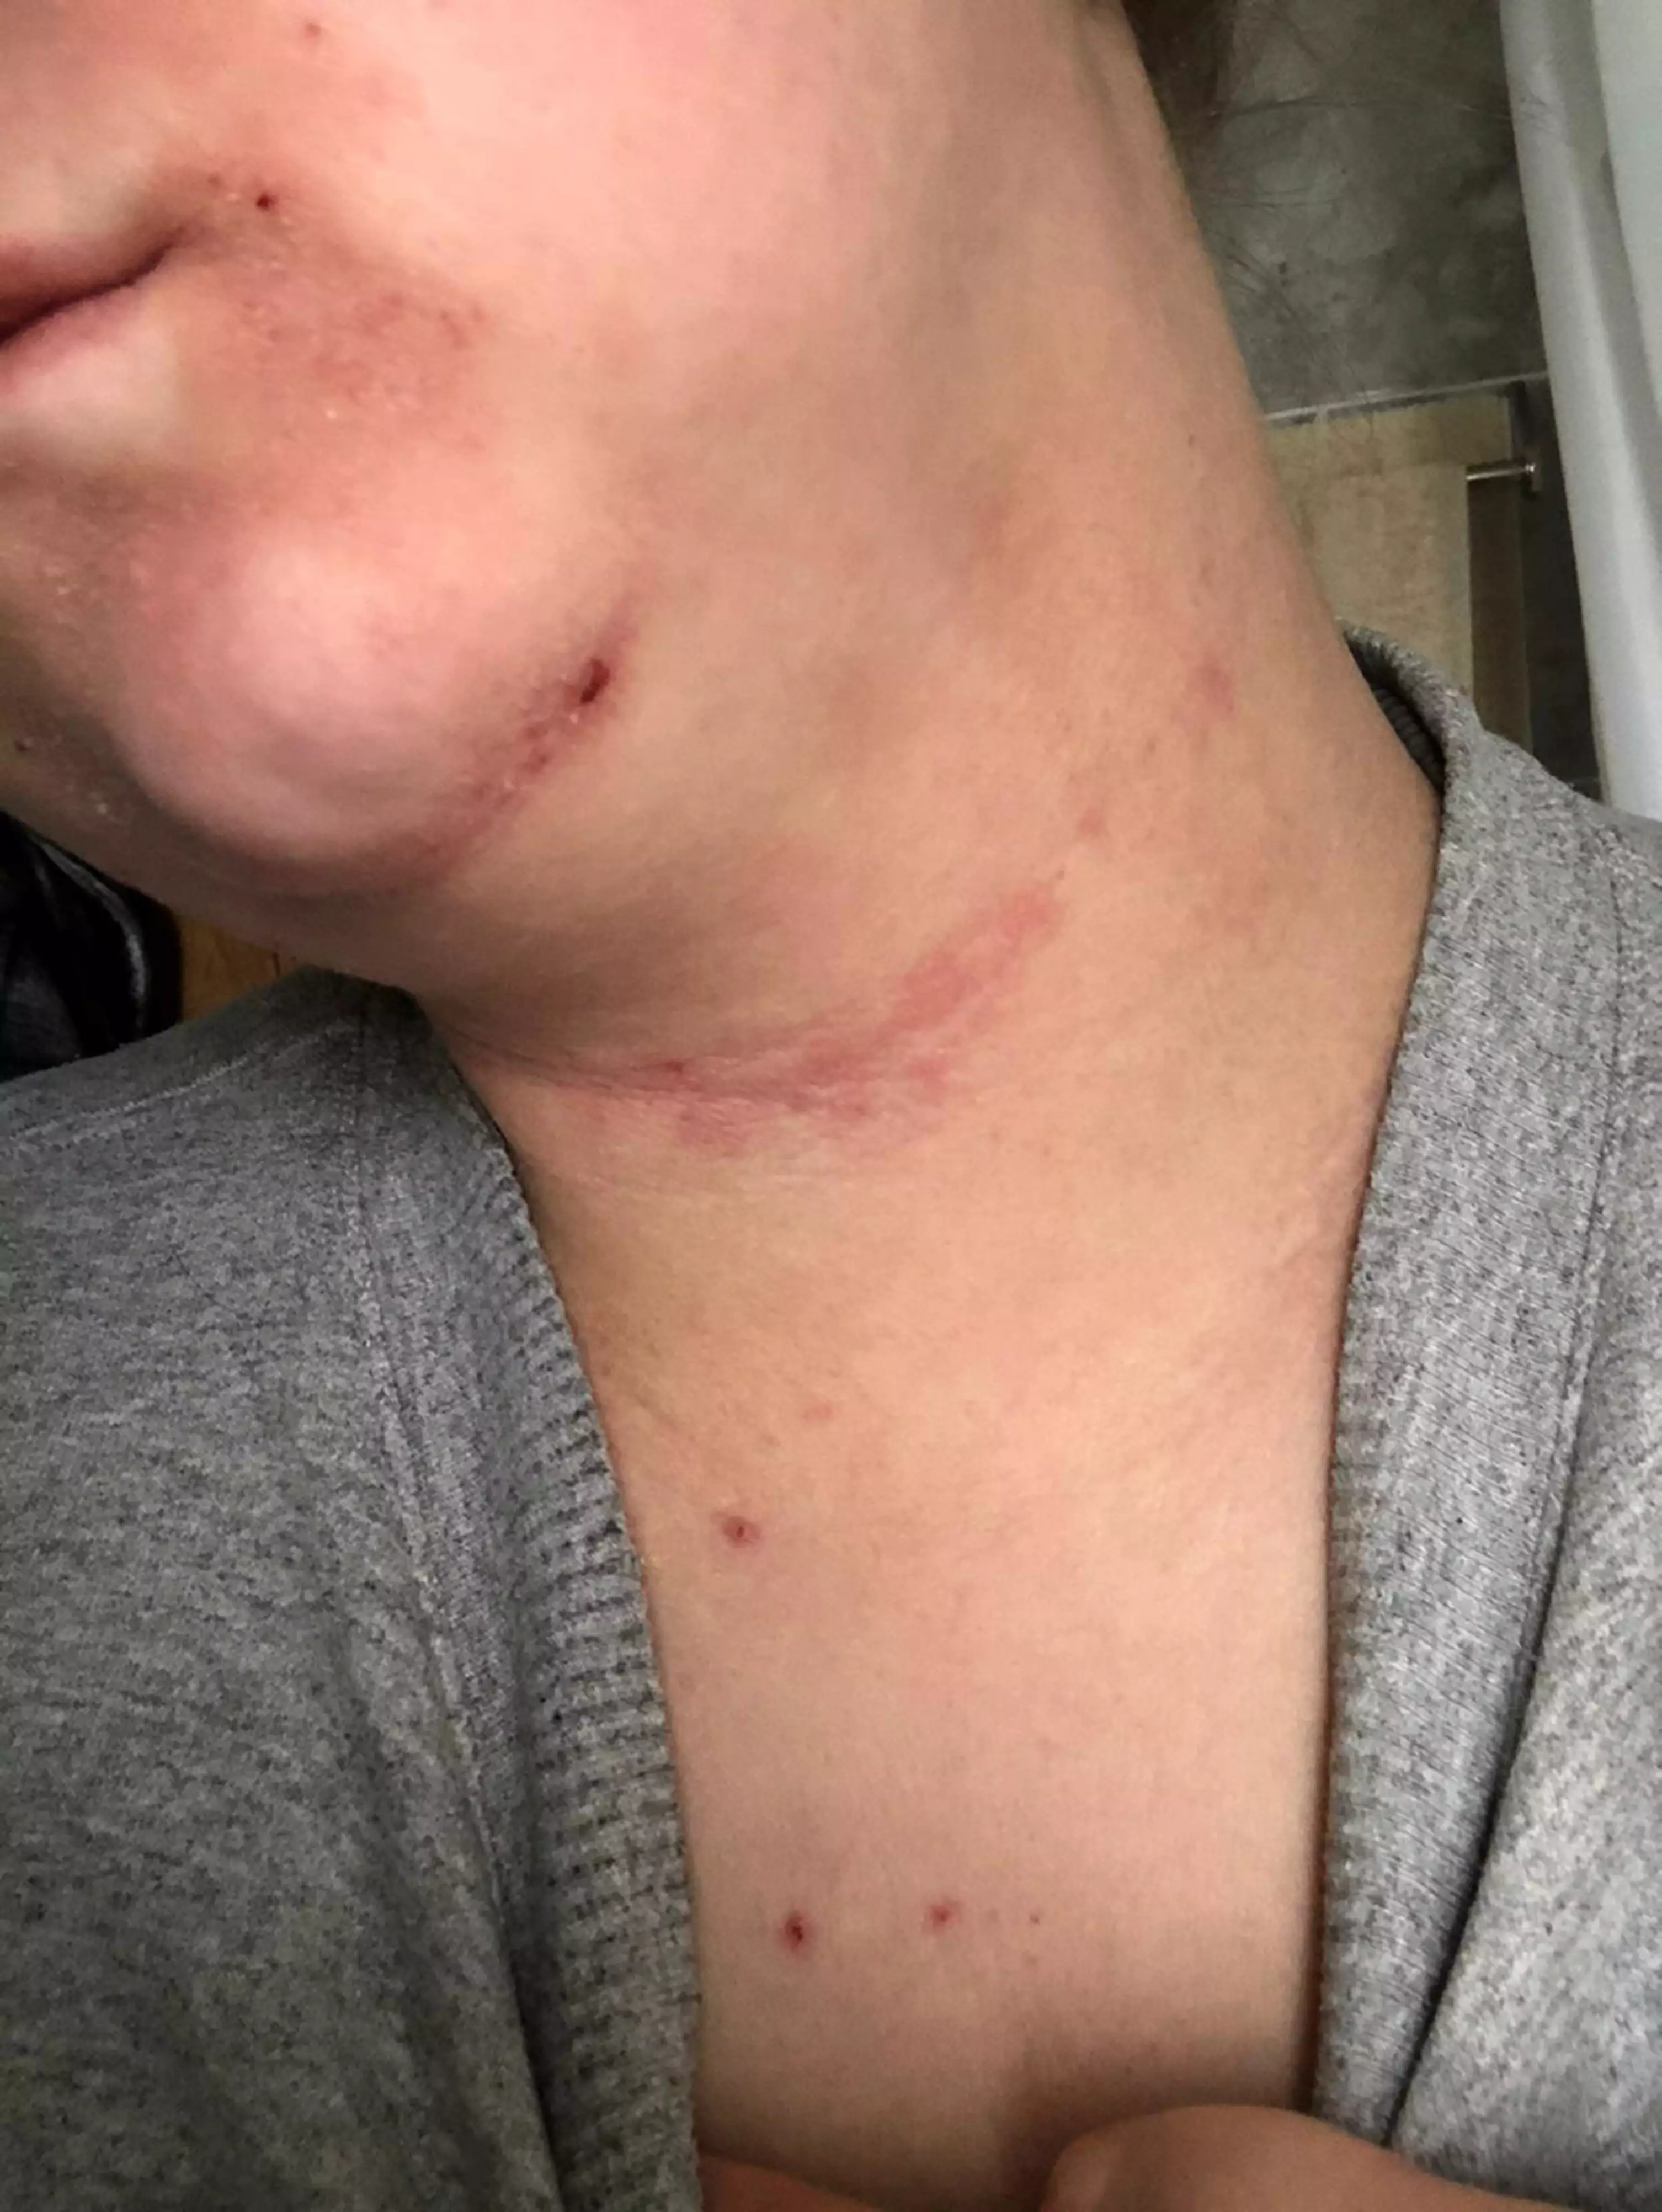 Megan said her eczema has been seriously affecting her confidence (